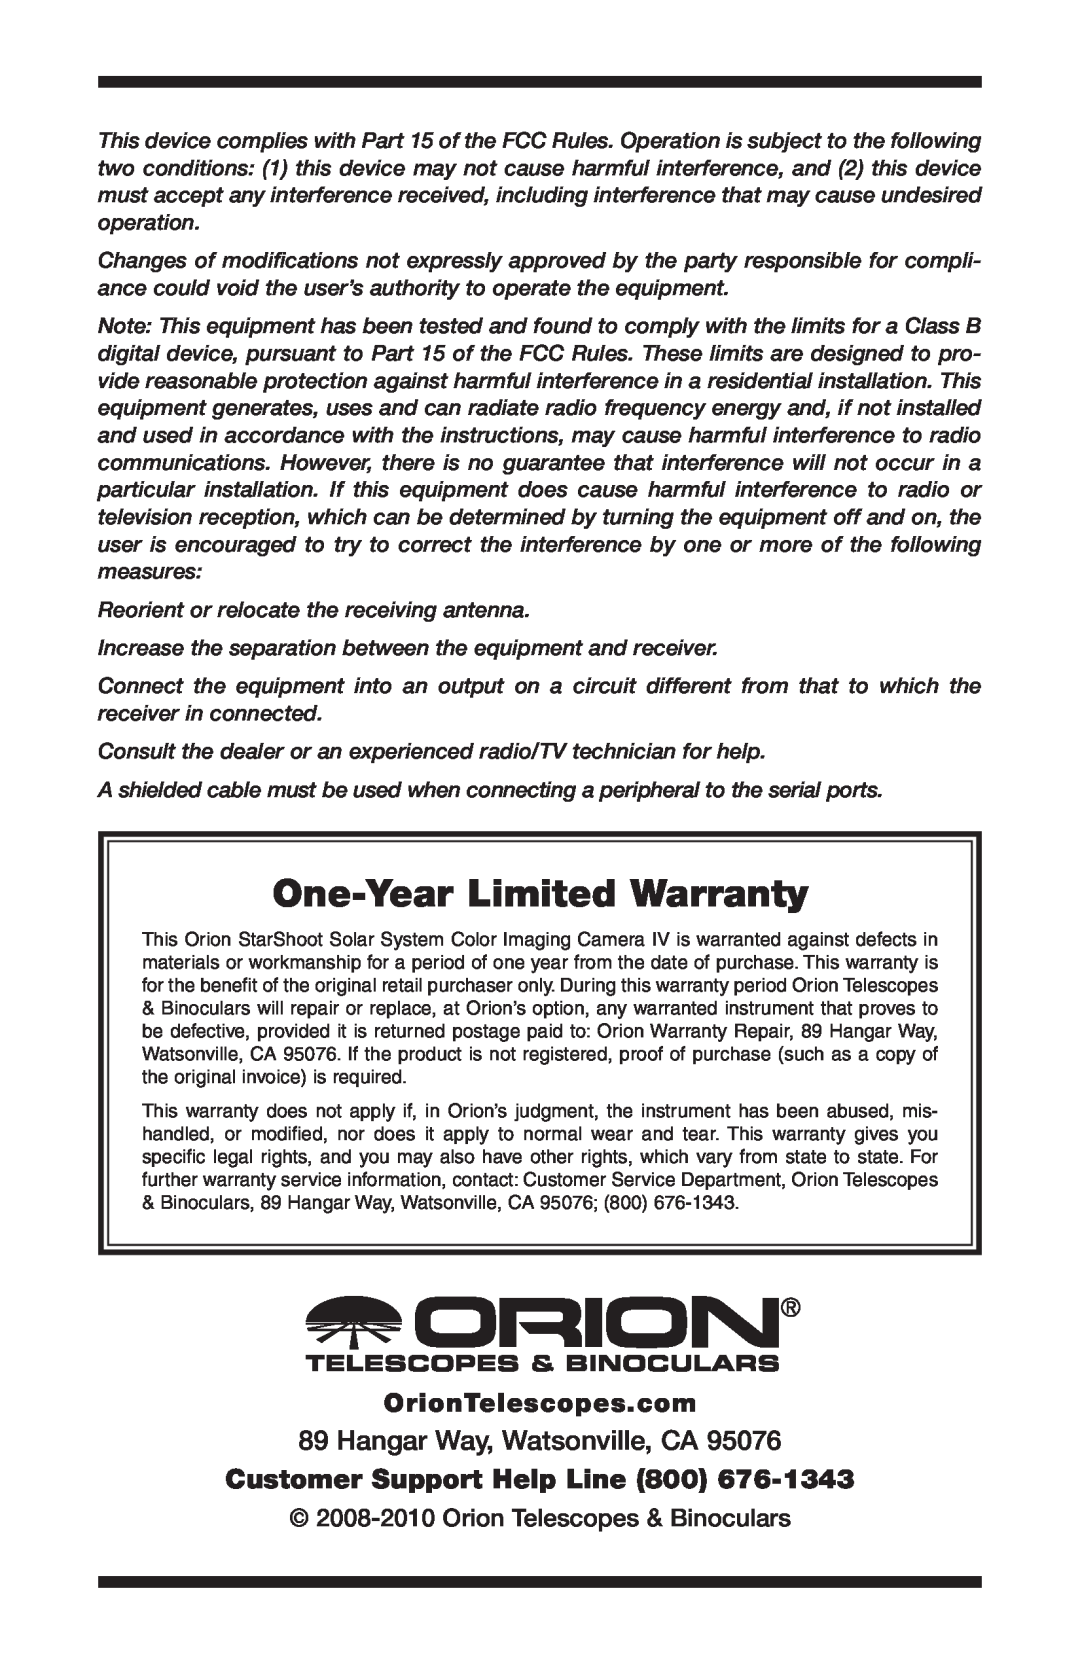 Orion 52175 One-Year Limited Warranty, OrionTelescopes.com, Hangar Way, Watsonville, CA, Customer Support Help Line 800 